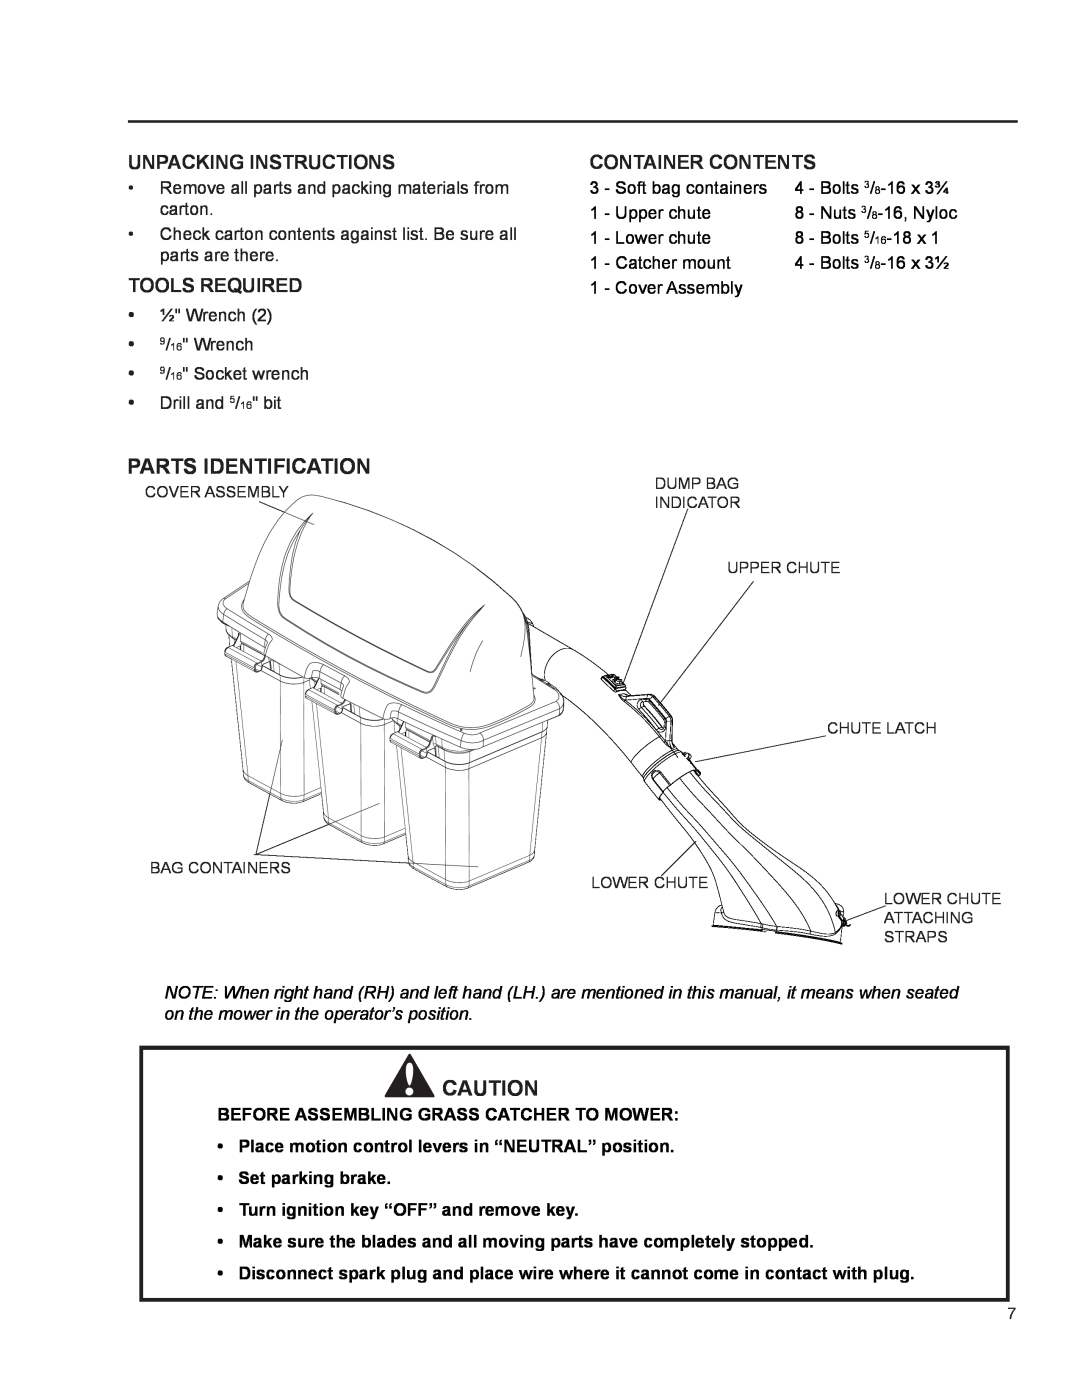 Dixon 966 004201 manual Parts Identification, Unpacking Instructions, Tools Required, Container Contents 